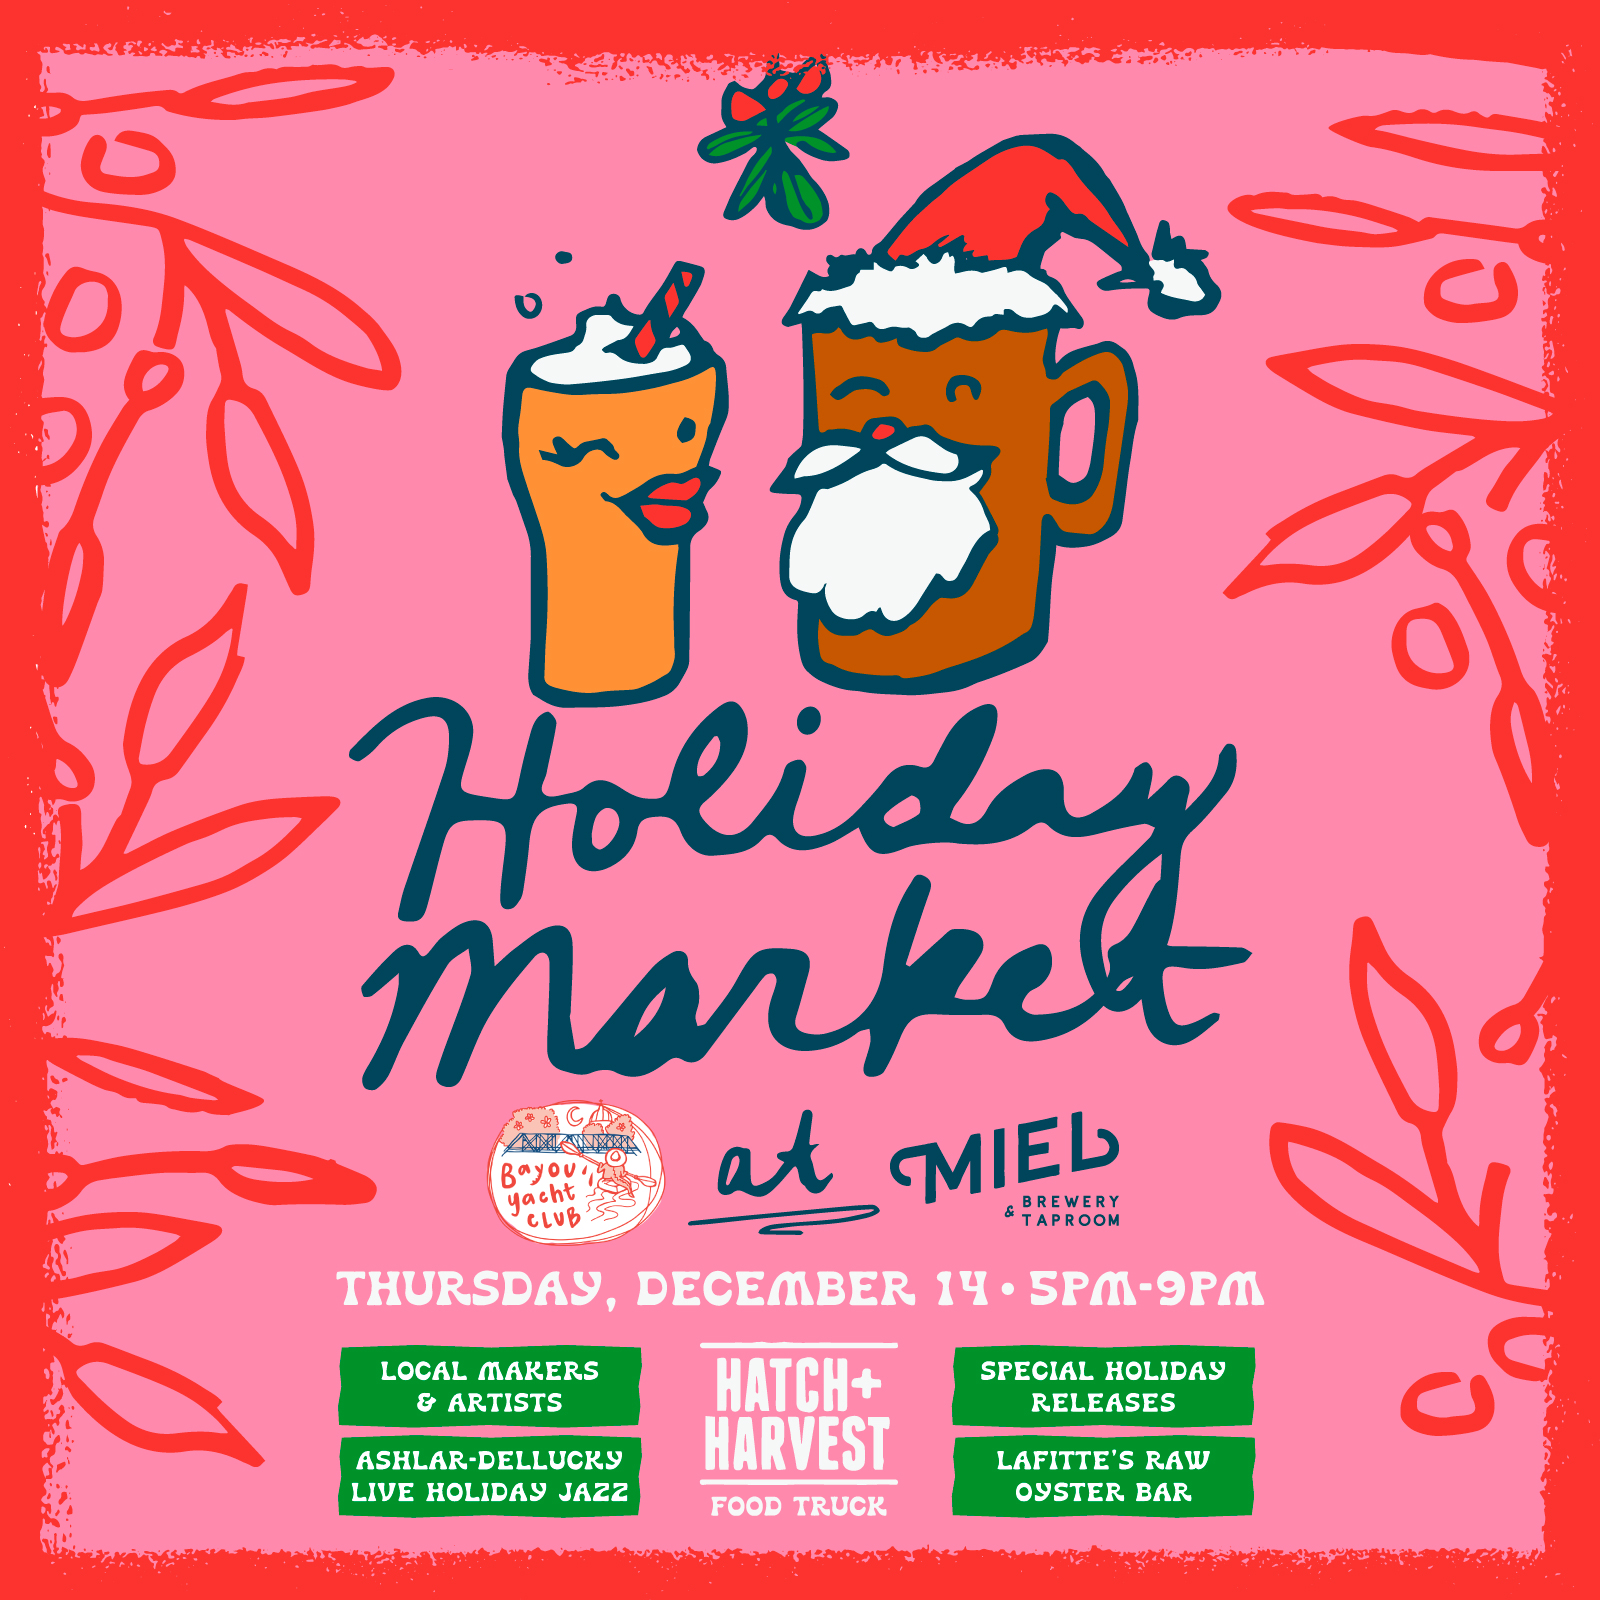 HOLIDAY Market flyer square